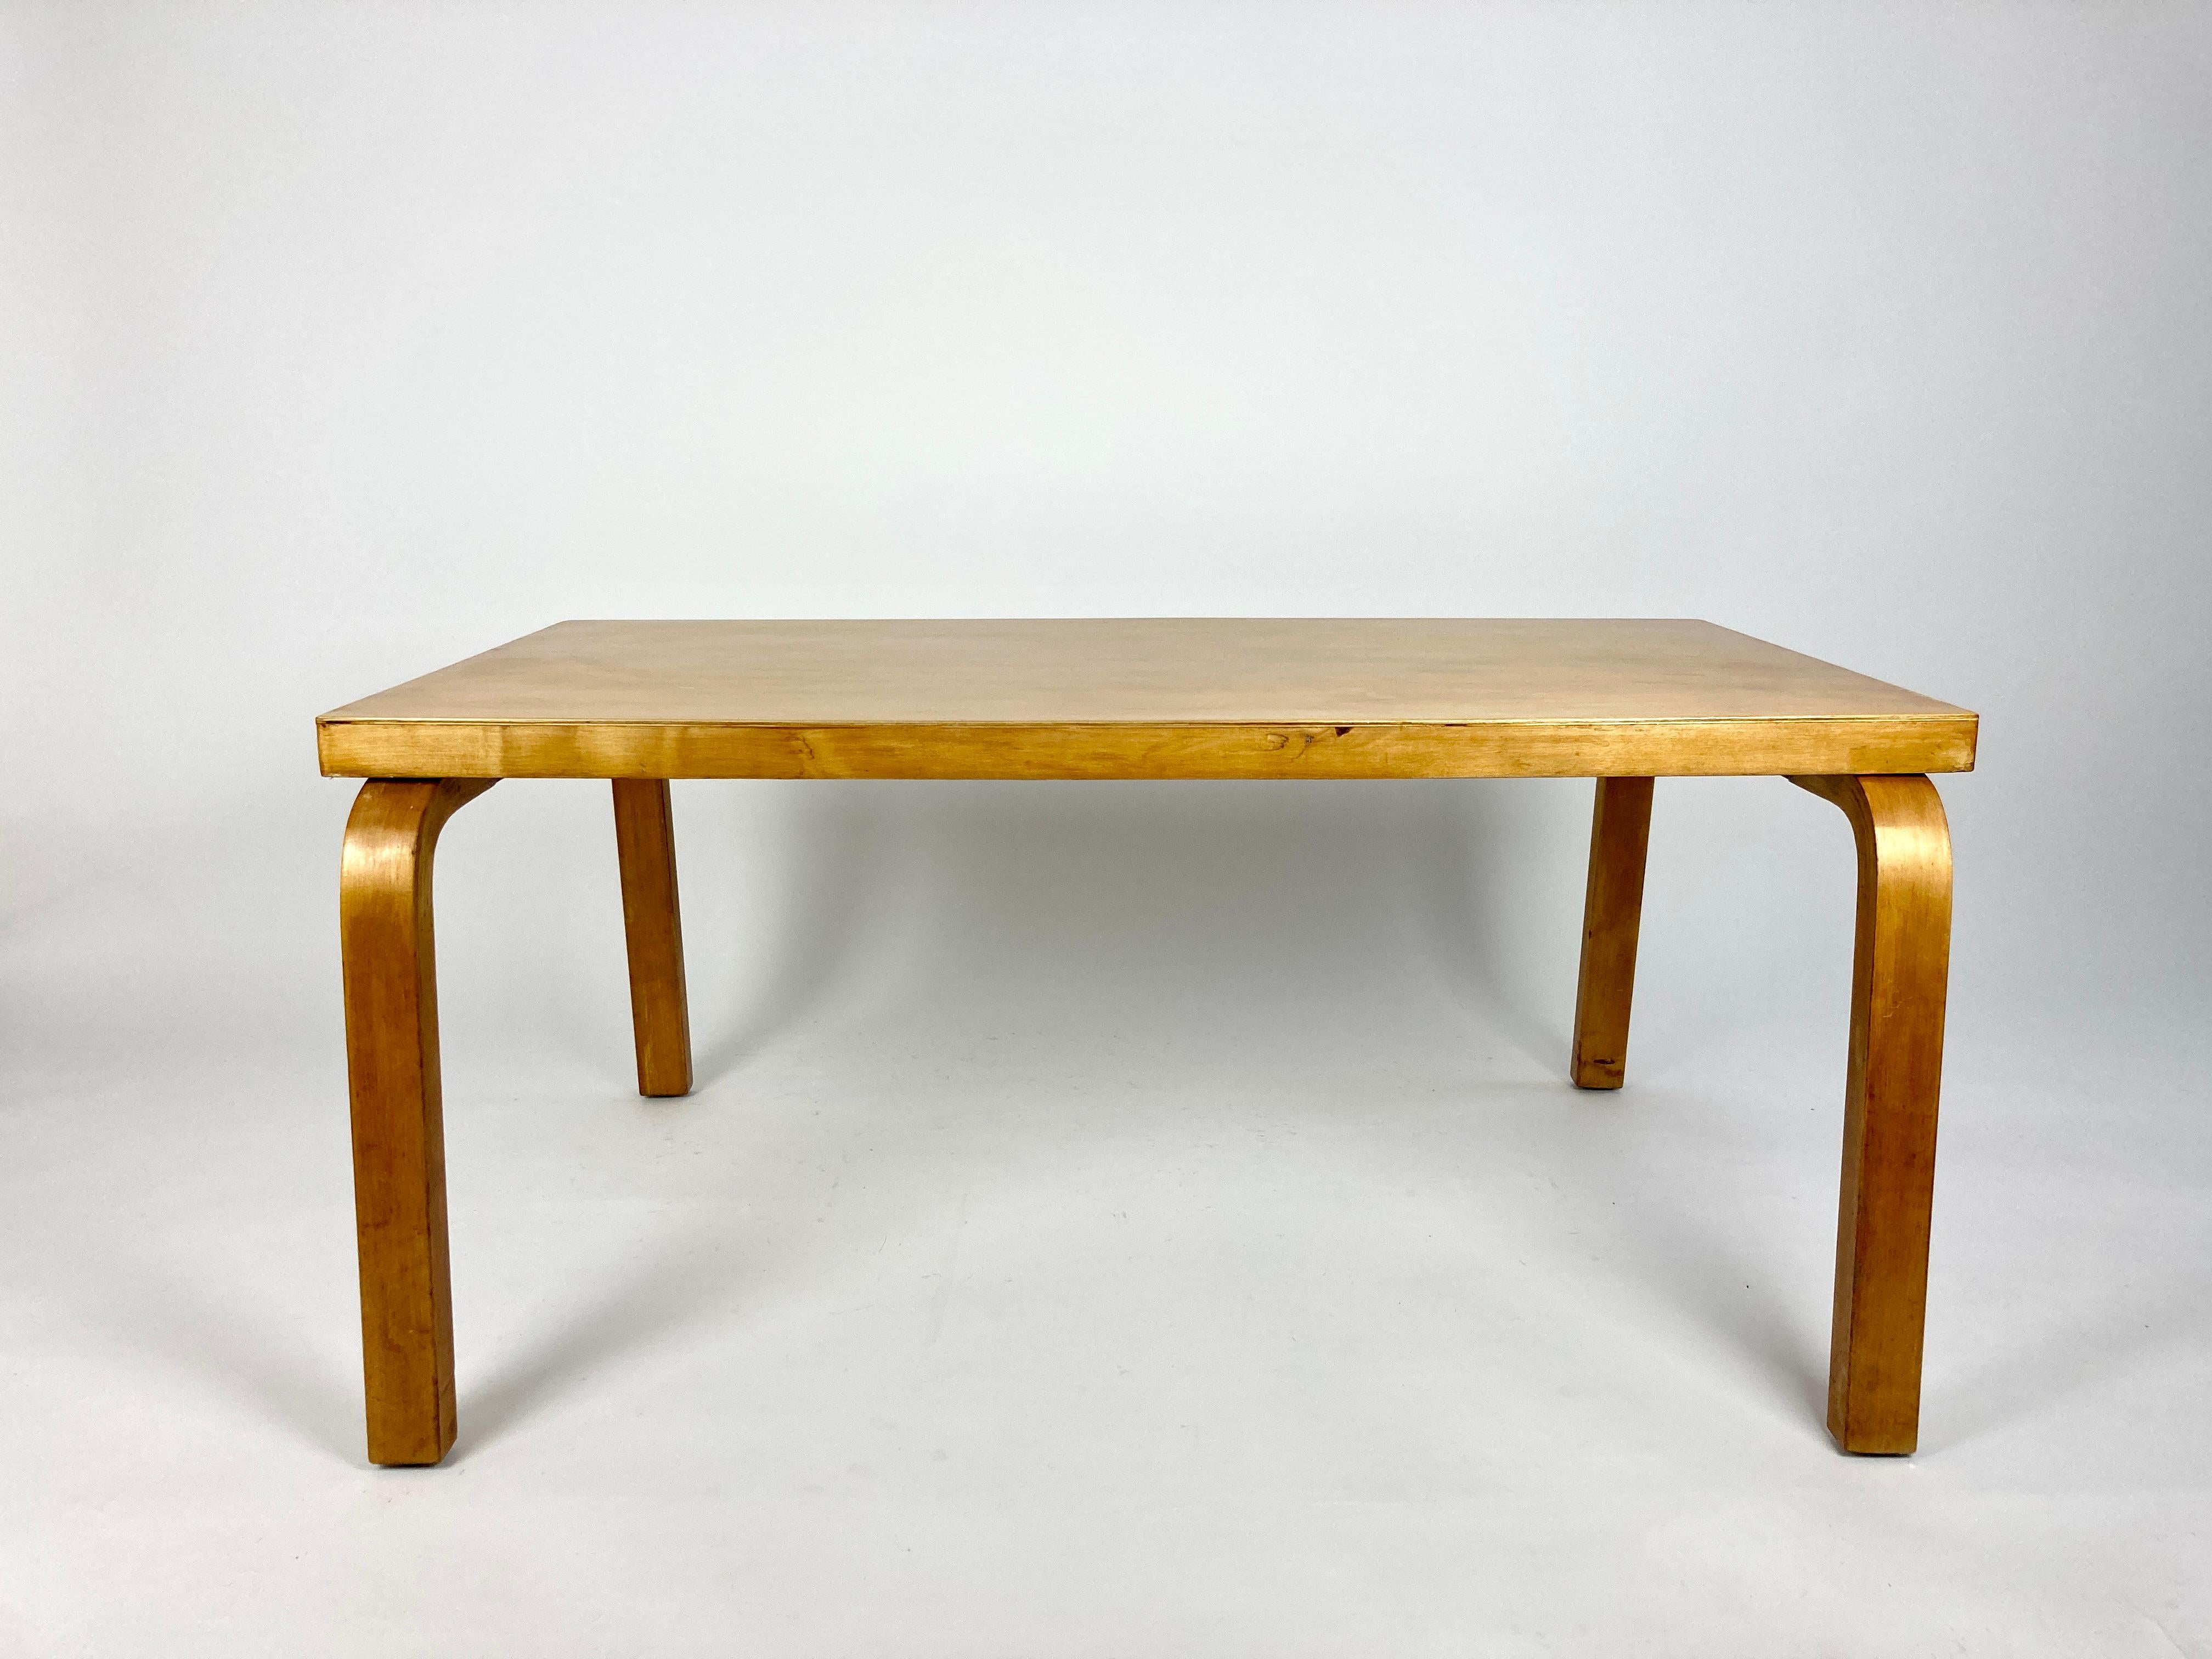 Birch 1930s low rectangular coffee table by Alvar Aalto for Finmar / P E Gane